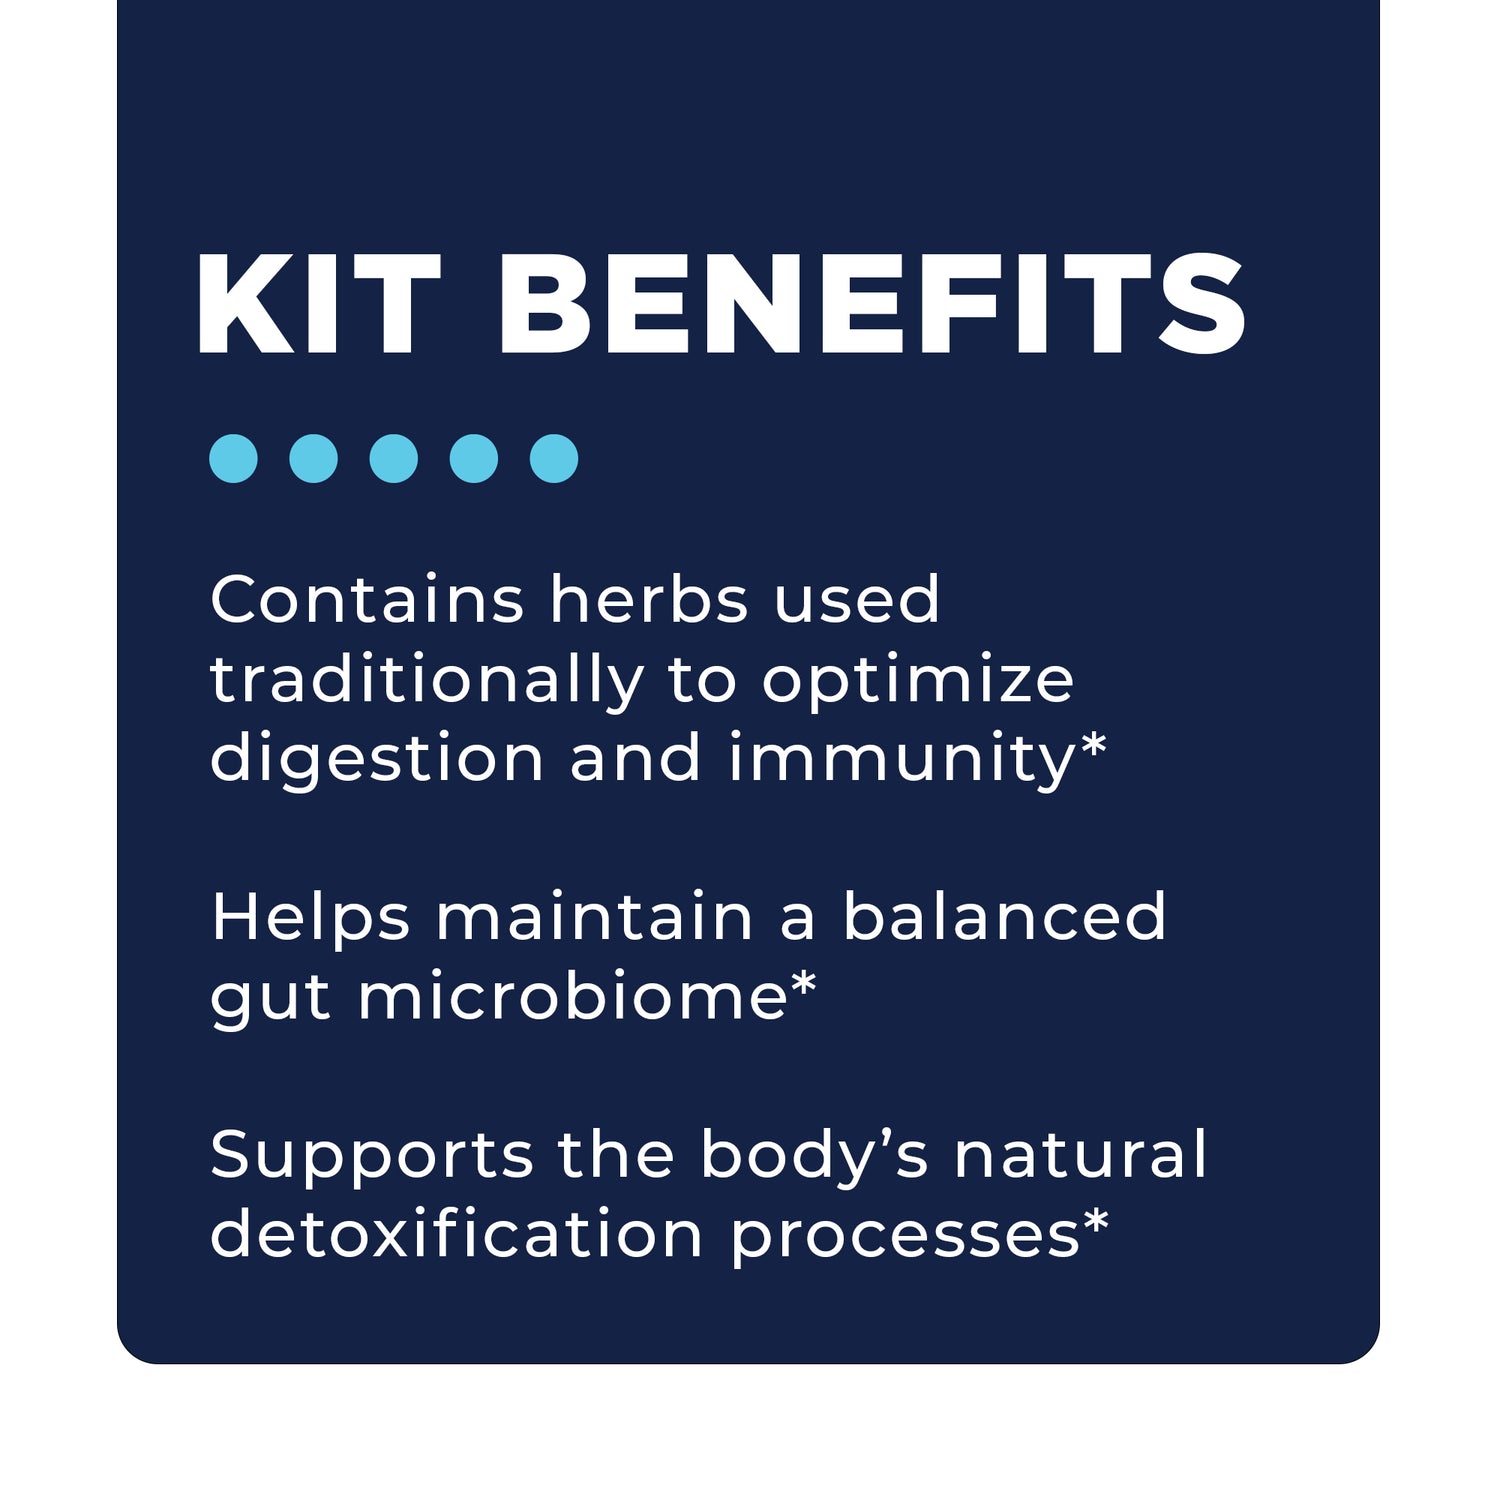 C.A. Support Kit Benefits